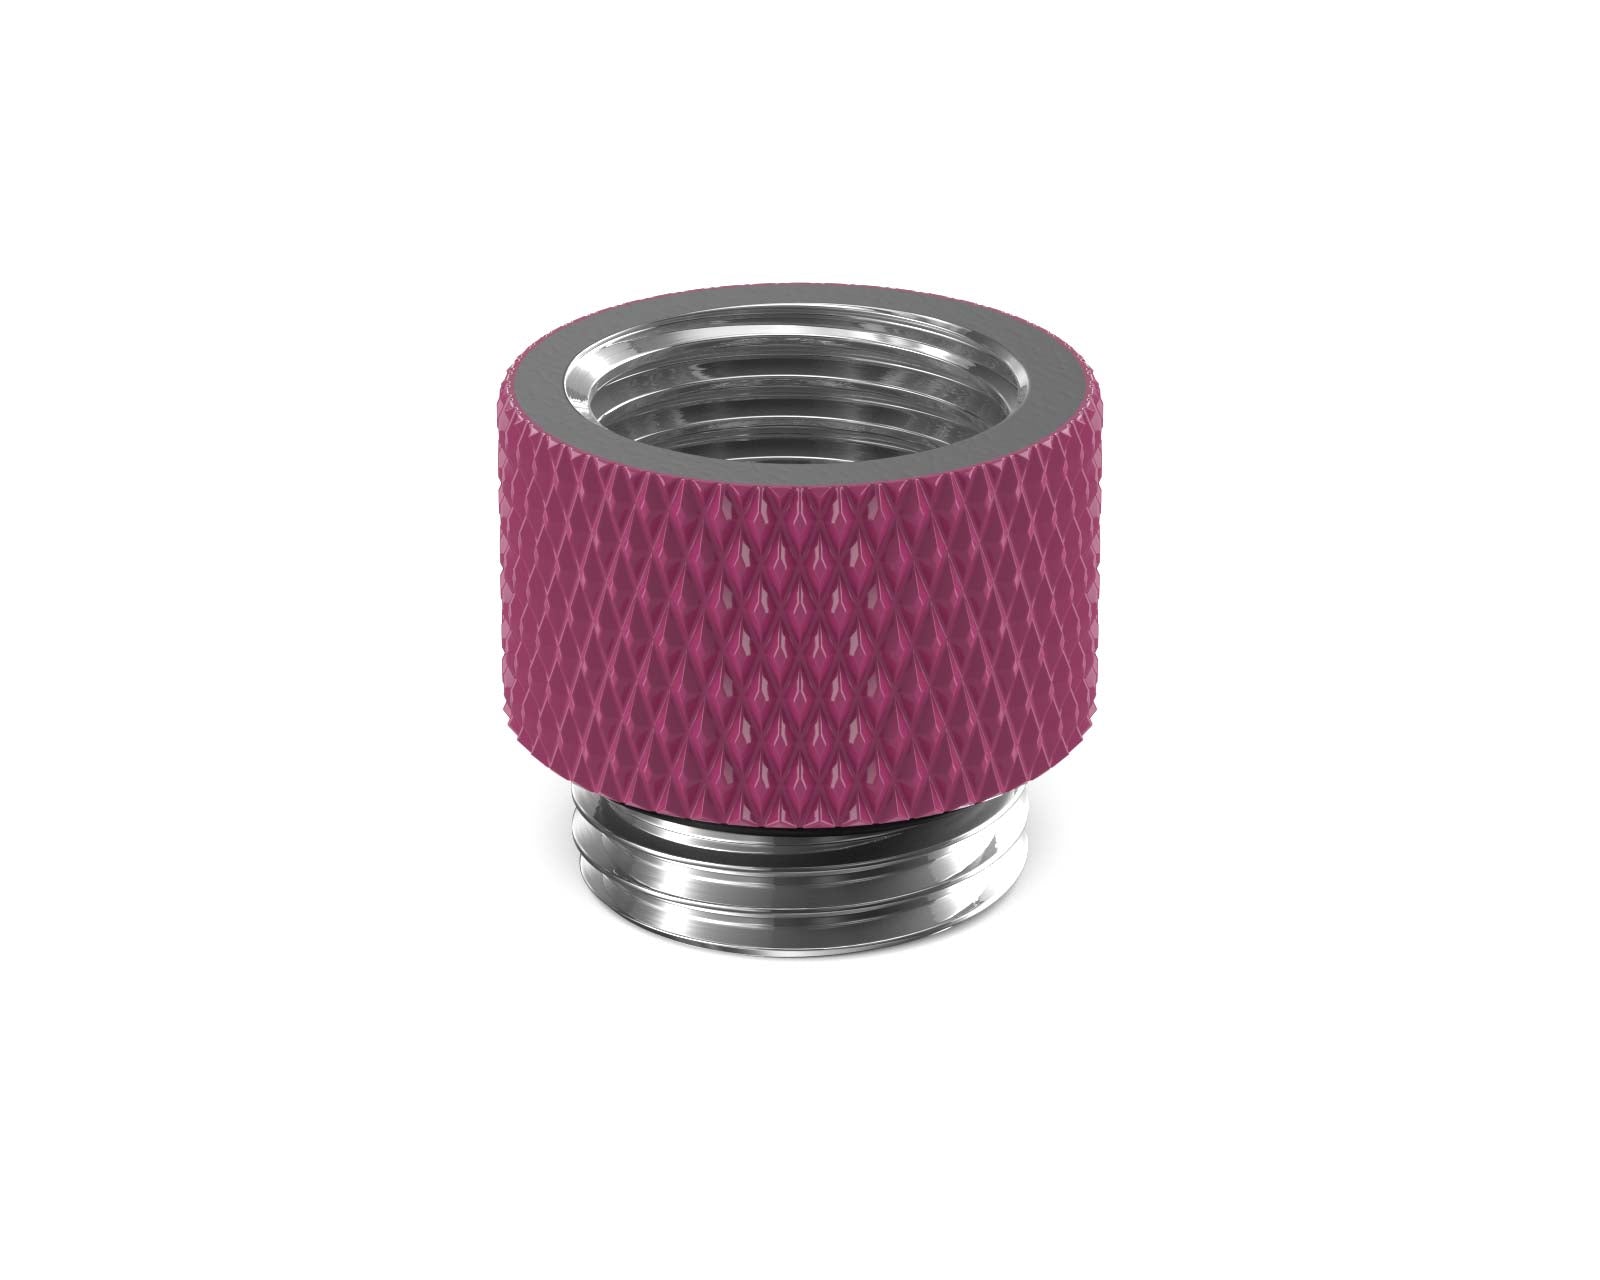 PrimoChill Male to Female G 1/4in. 10mm SX Extension Coupler - PrimoChill - KEEPING IT COOL Magenta